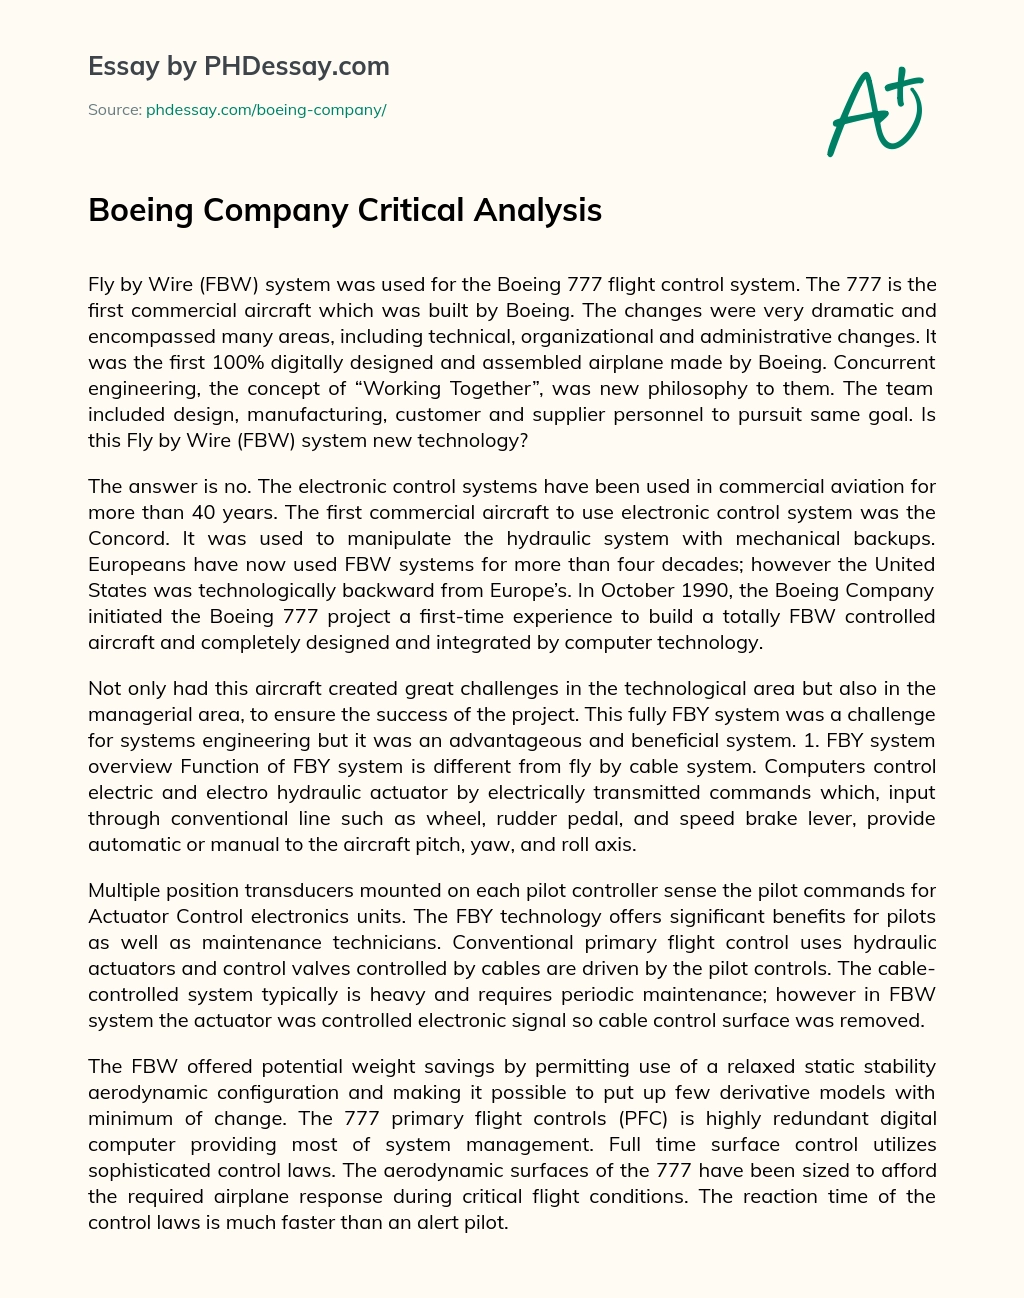 Boeing Company Critical Analysis essay